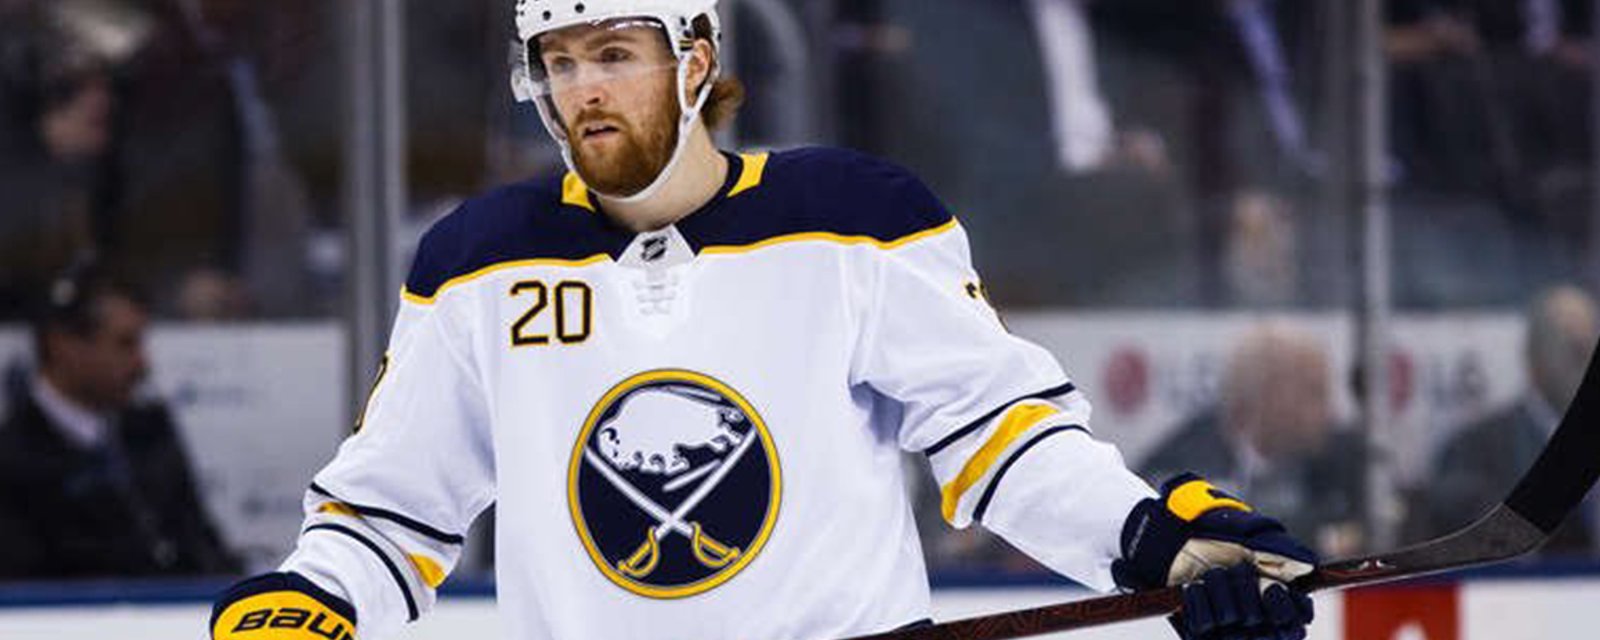 Breaking: Two NHLers on waivers, including Sabres’ Wilson